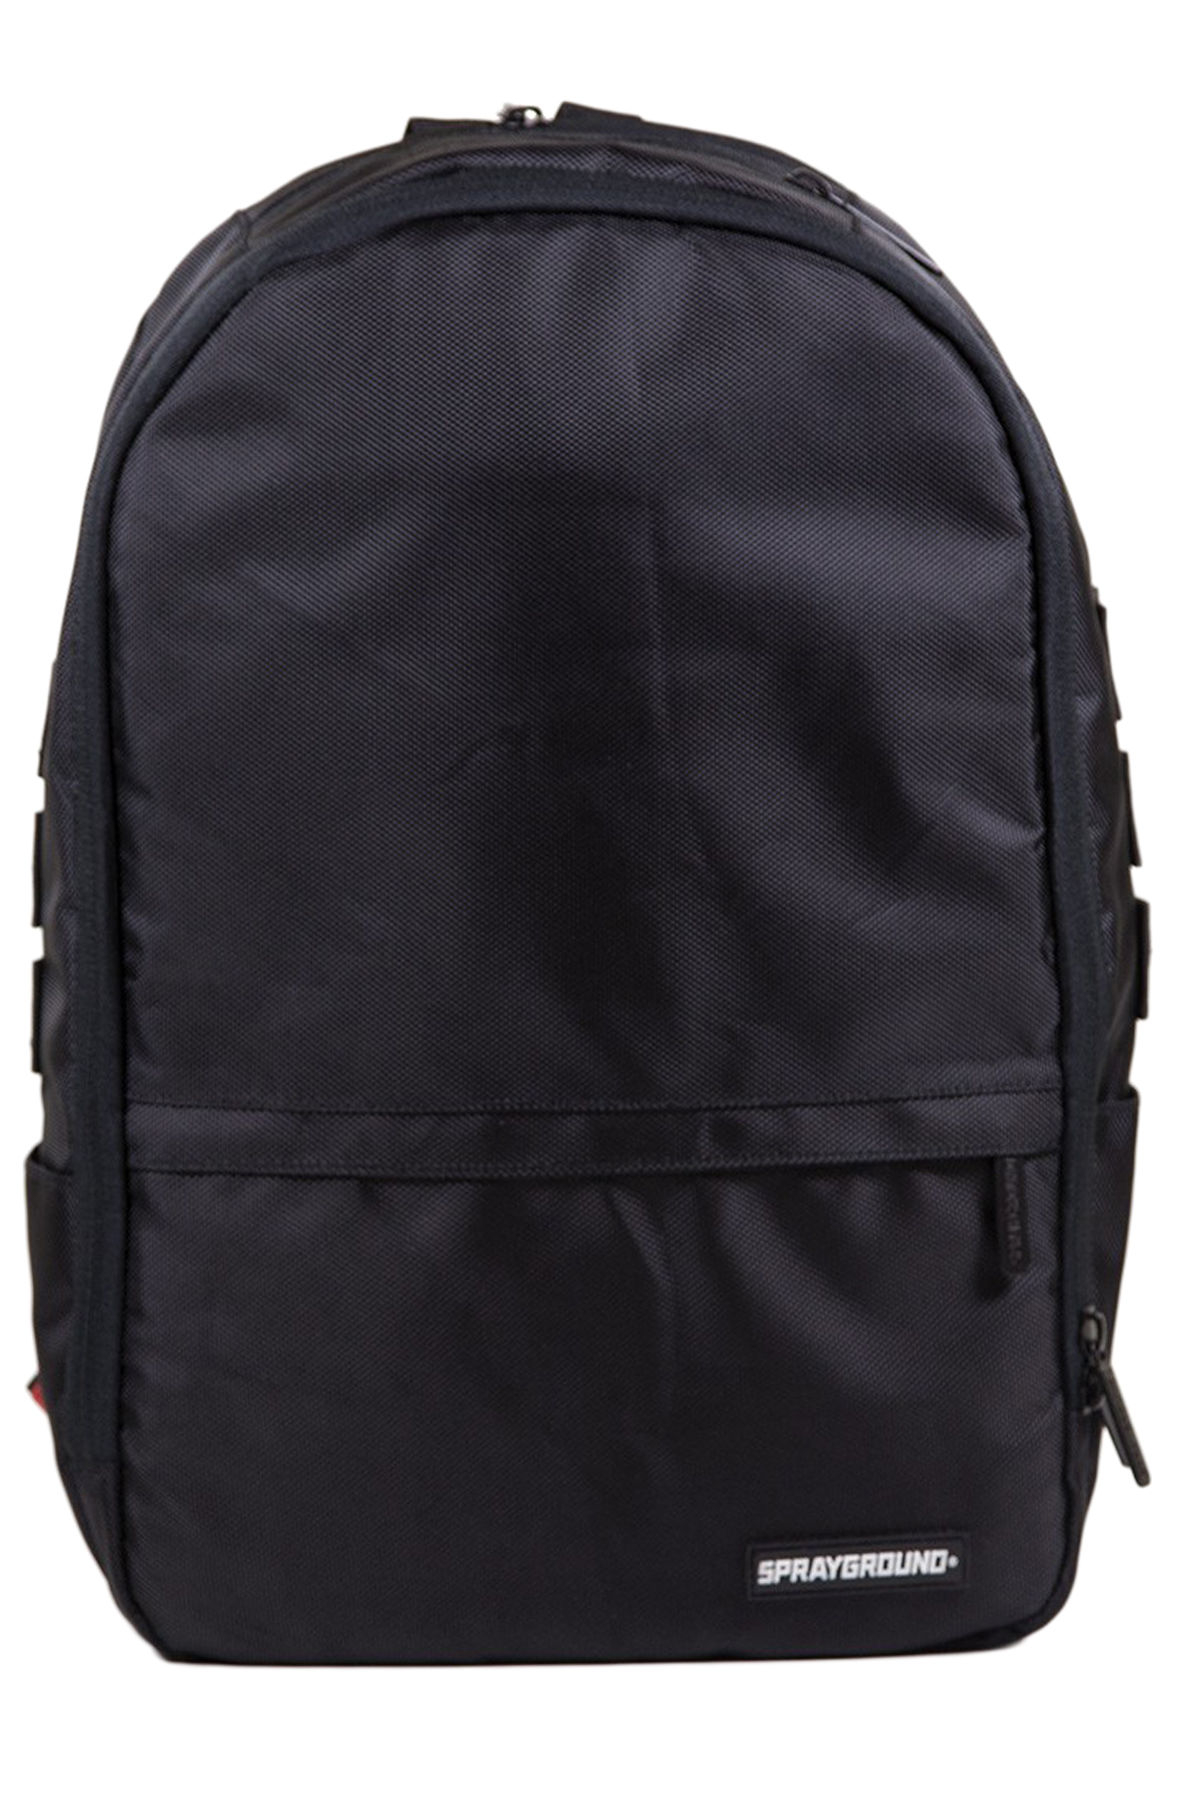 Lyst - Sprayground The Polyester Stashed Money Backpack in Black for Men